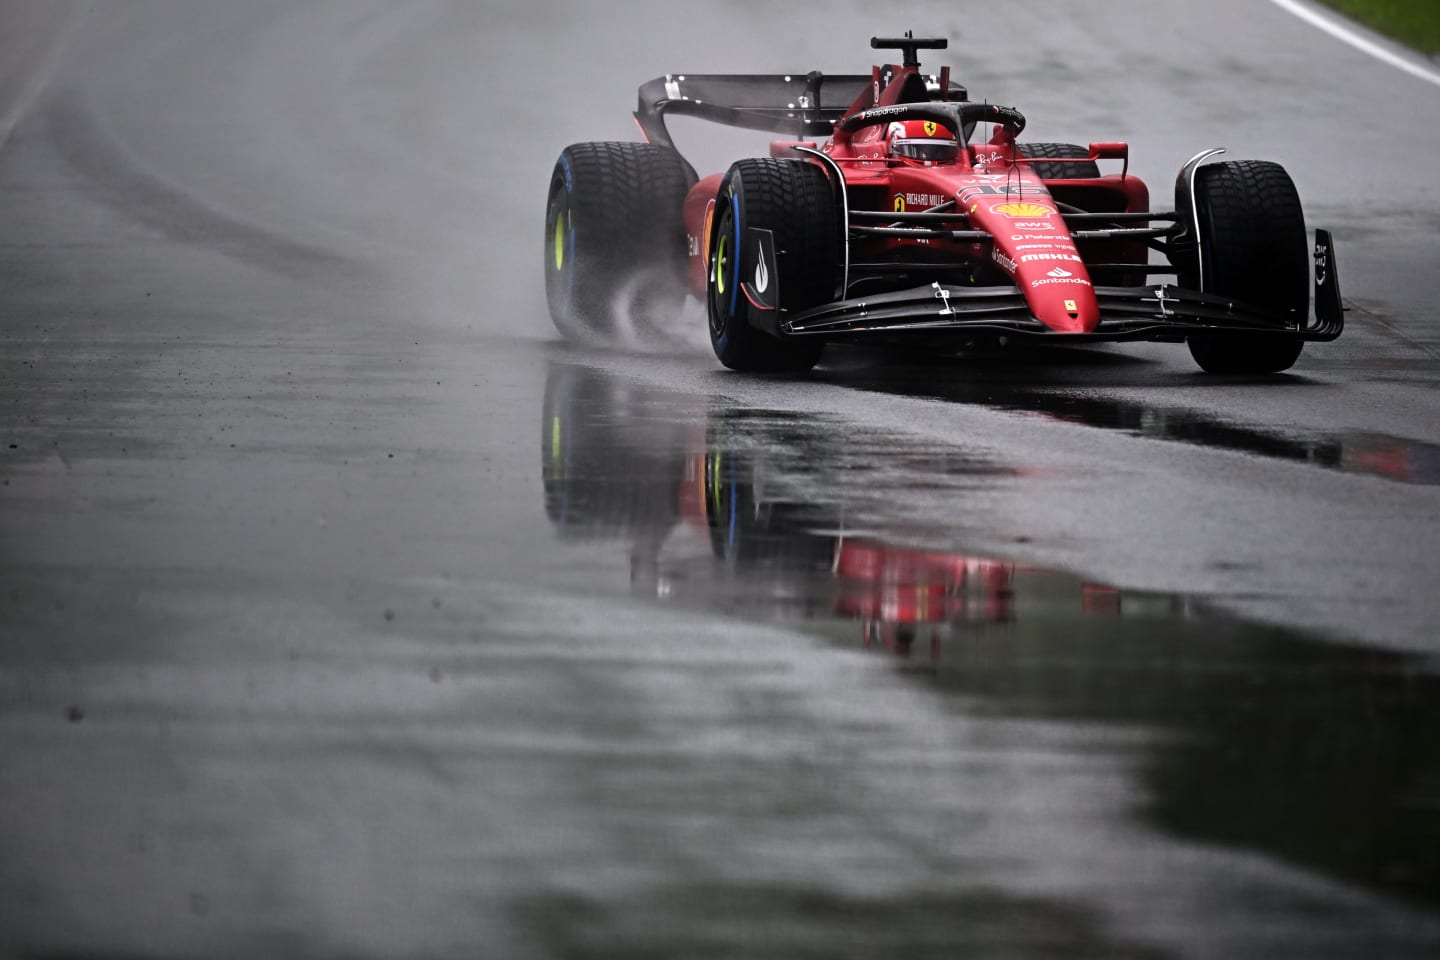 MONTREAL, QUEBEC - JUNE 18: Charles Leclerc of Monaco driving the (16) Ferrari F1-75 in the wet